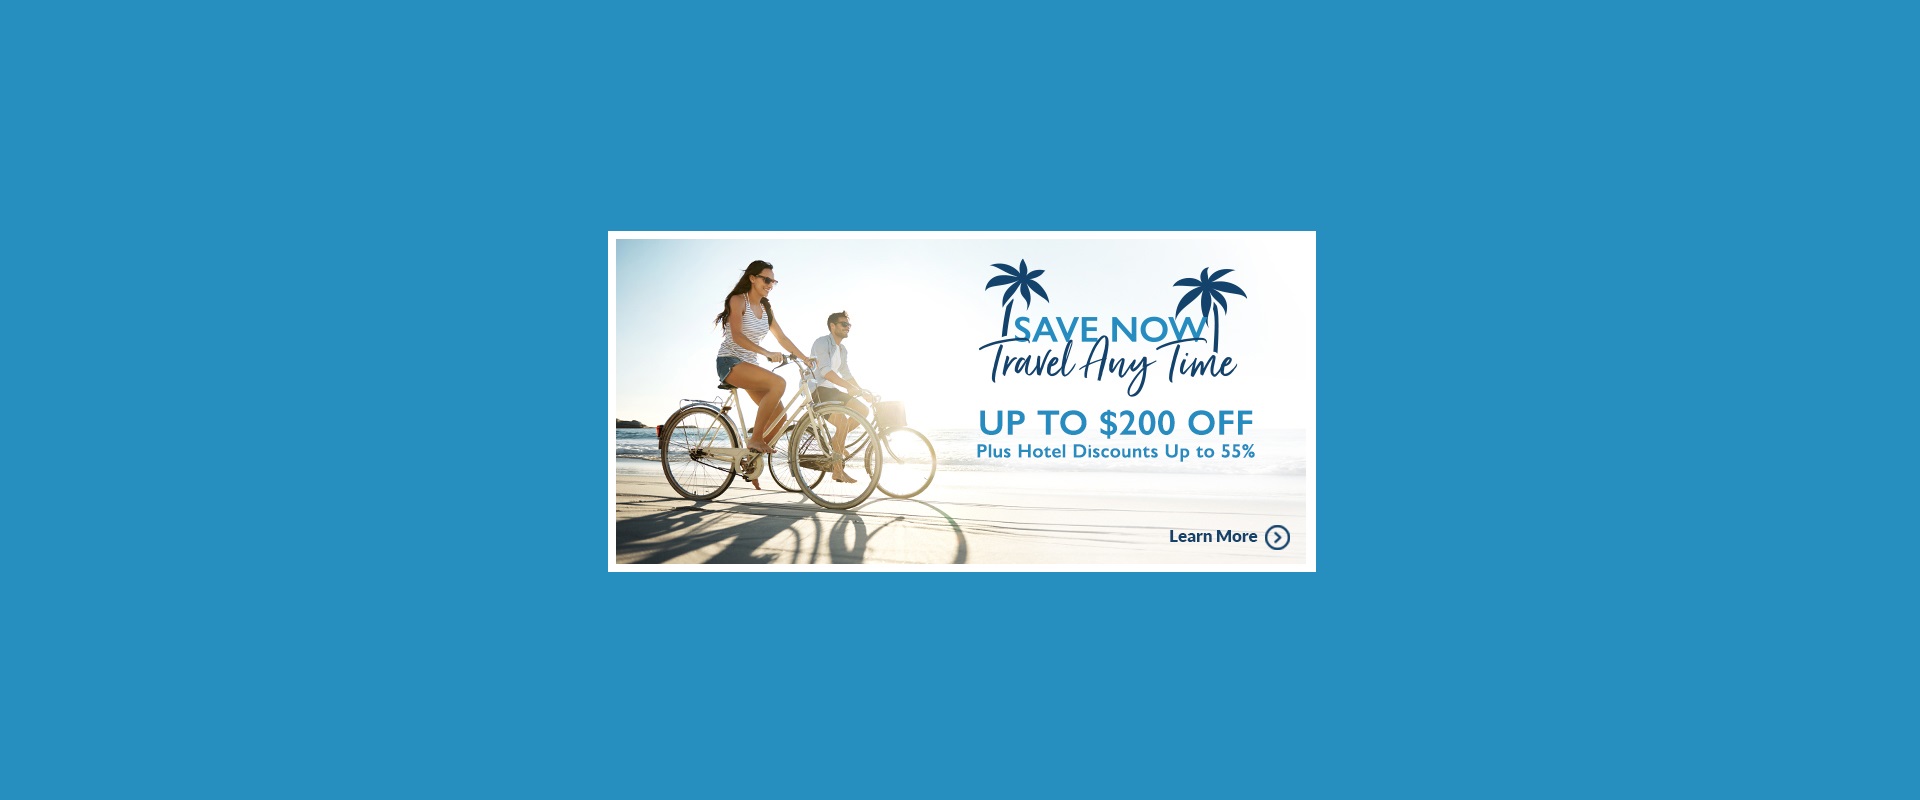 Save-Now-Travel-Later-Banner